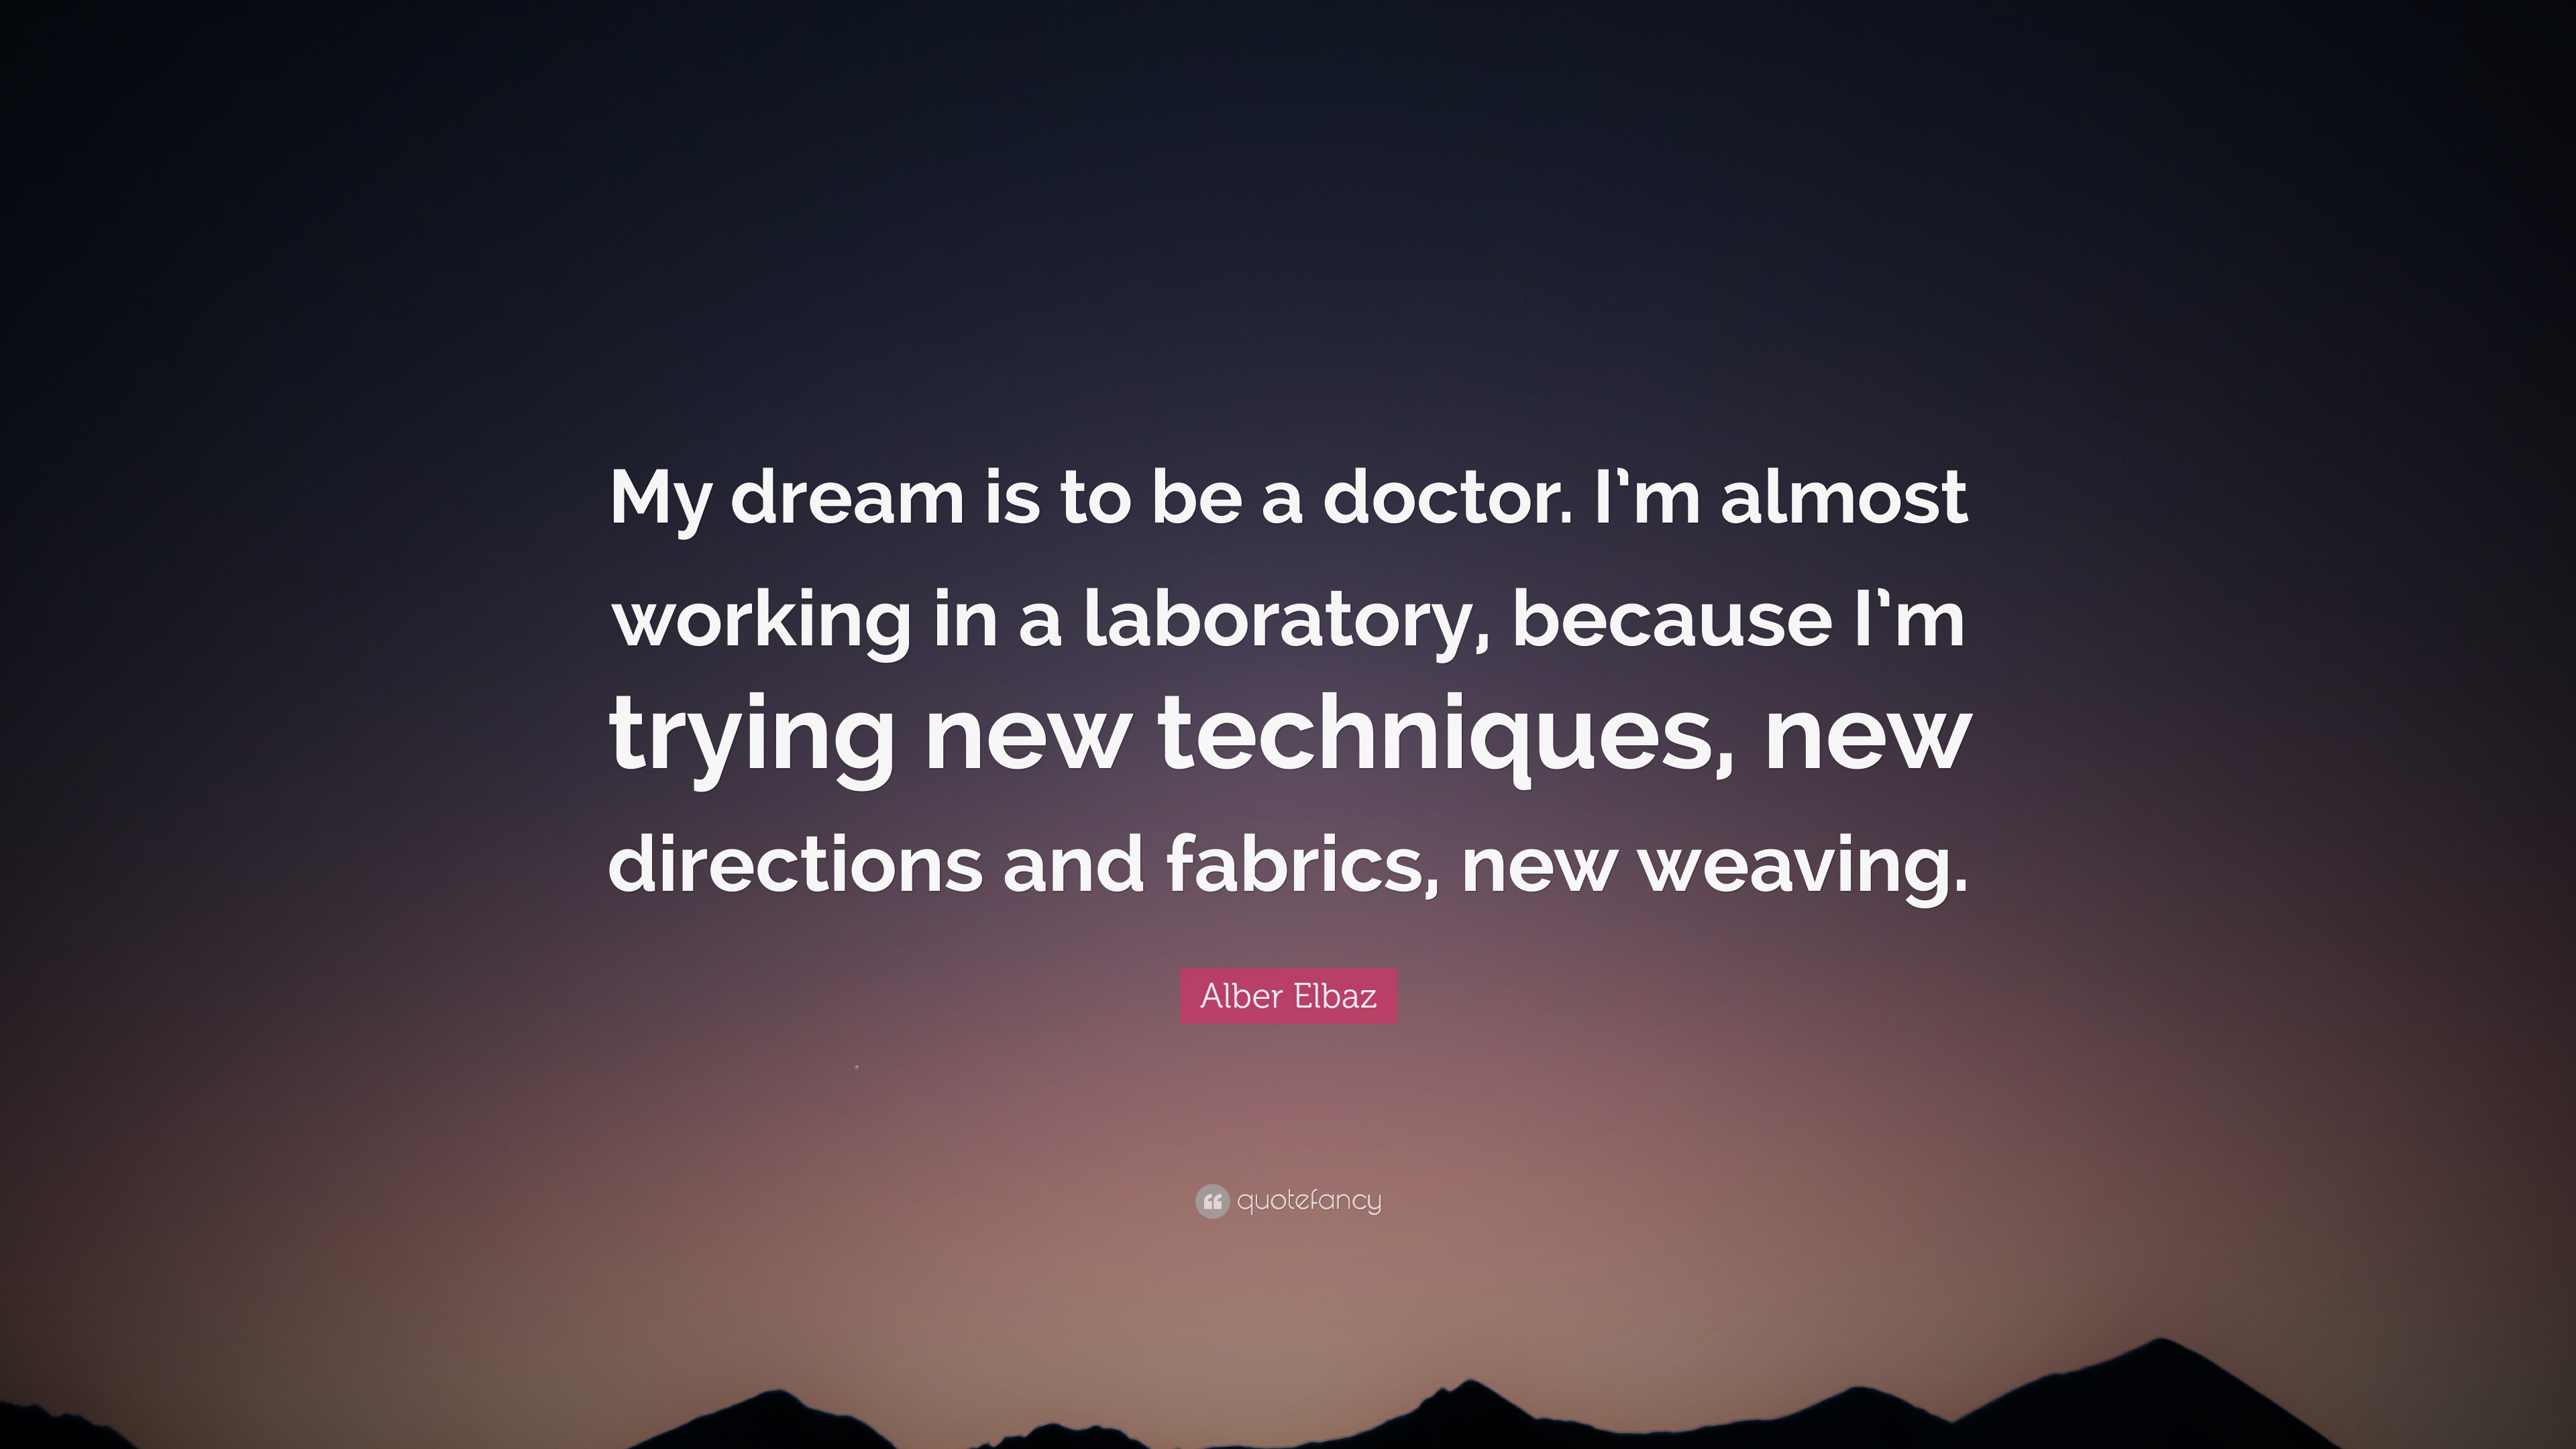 Alber Elbaz Quote: “My dream is to be a doctor. I'm almost working